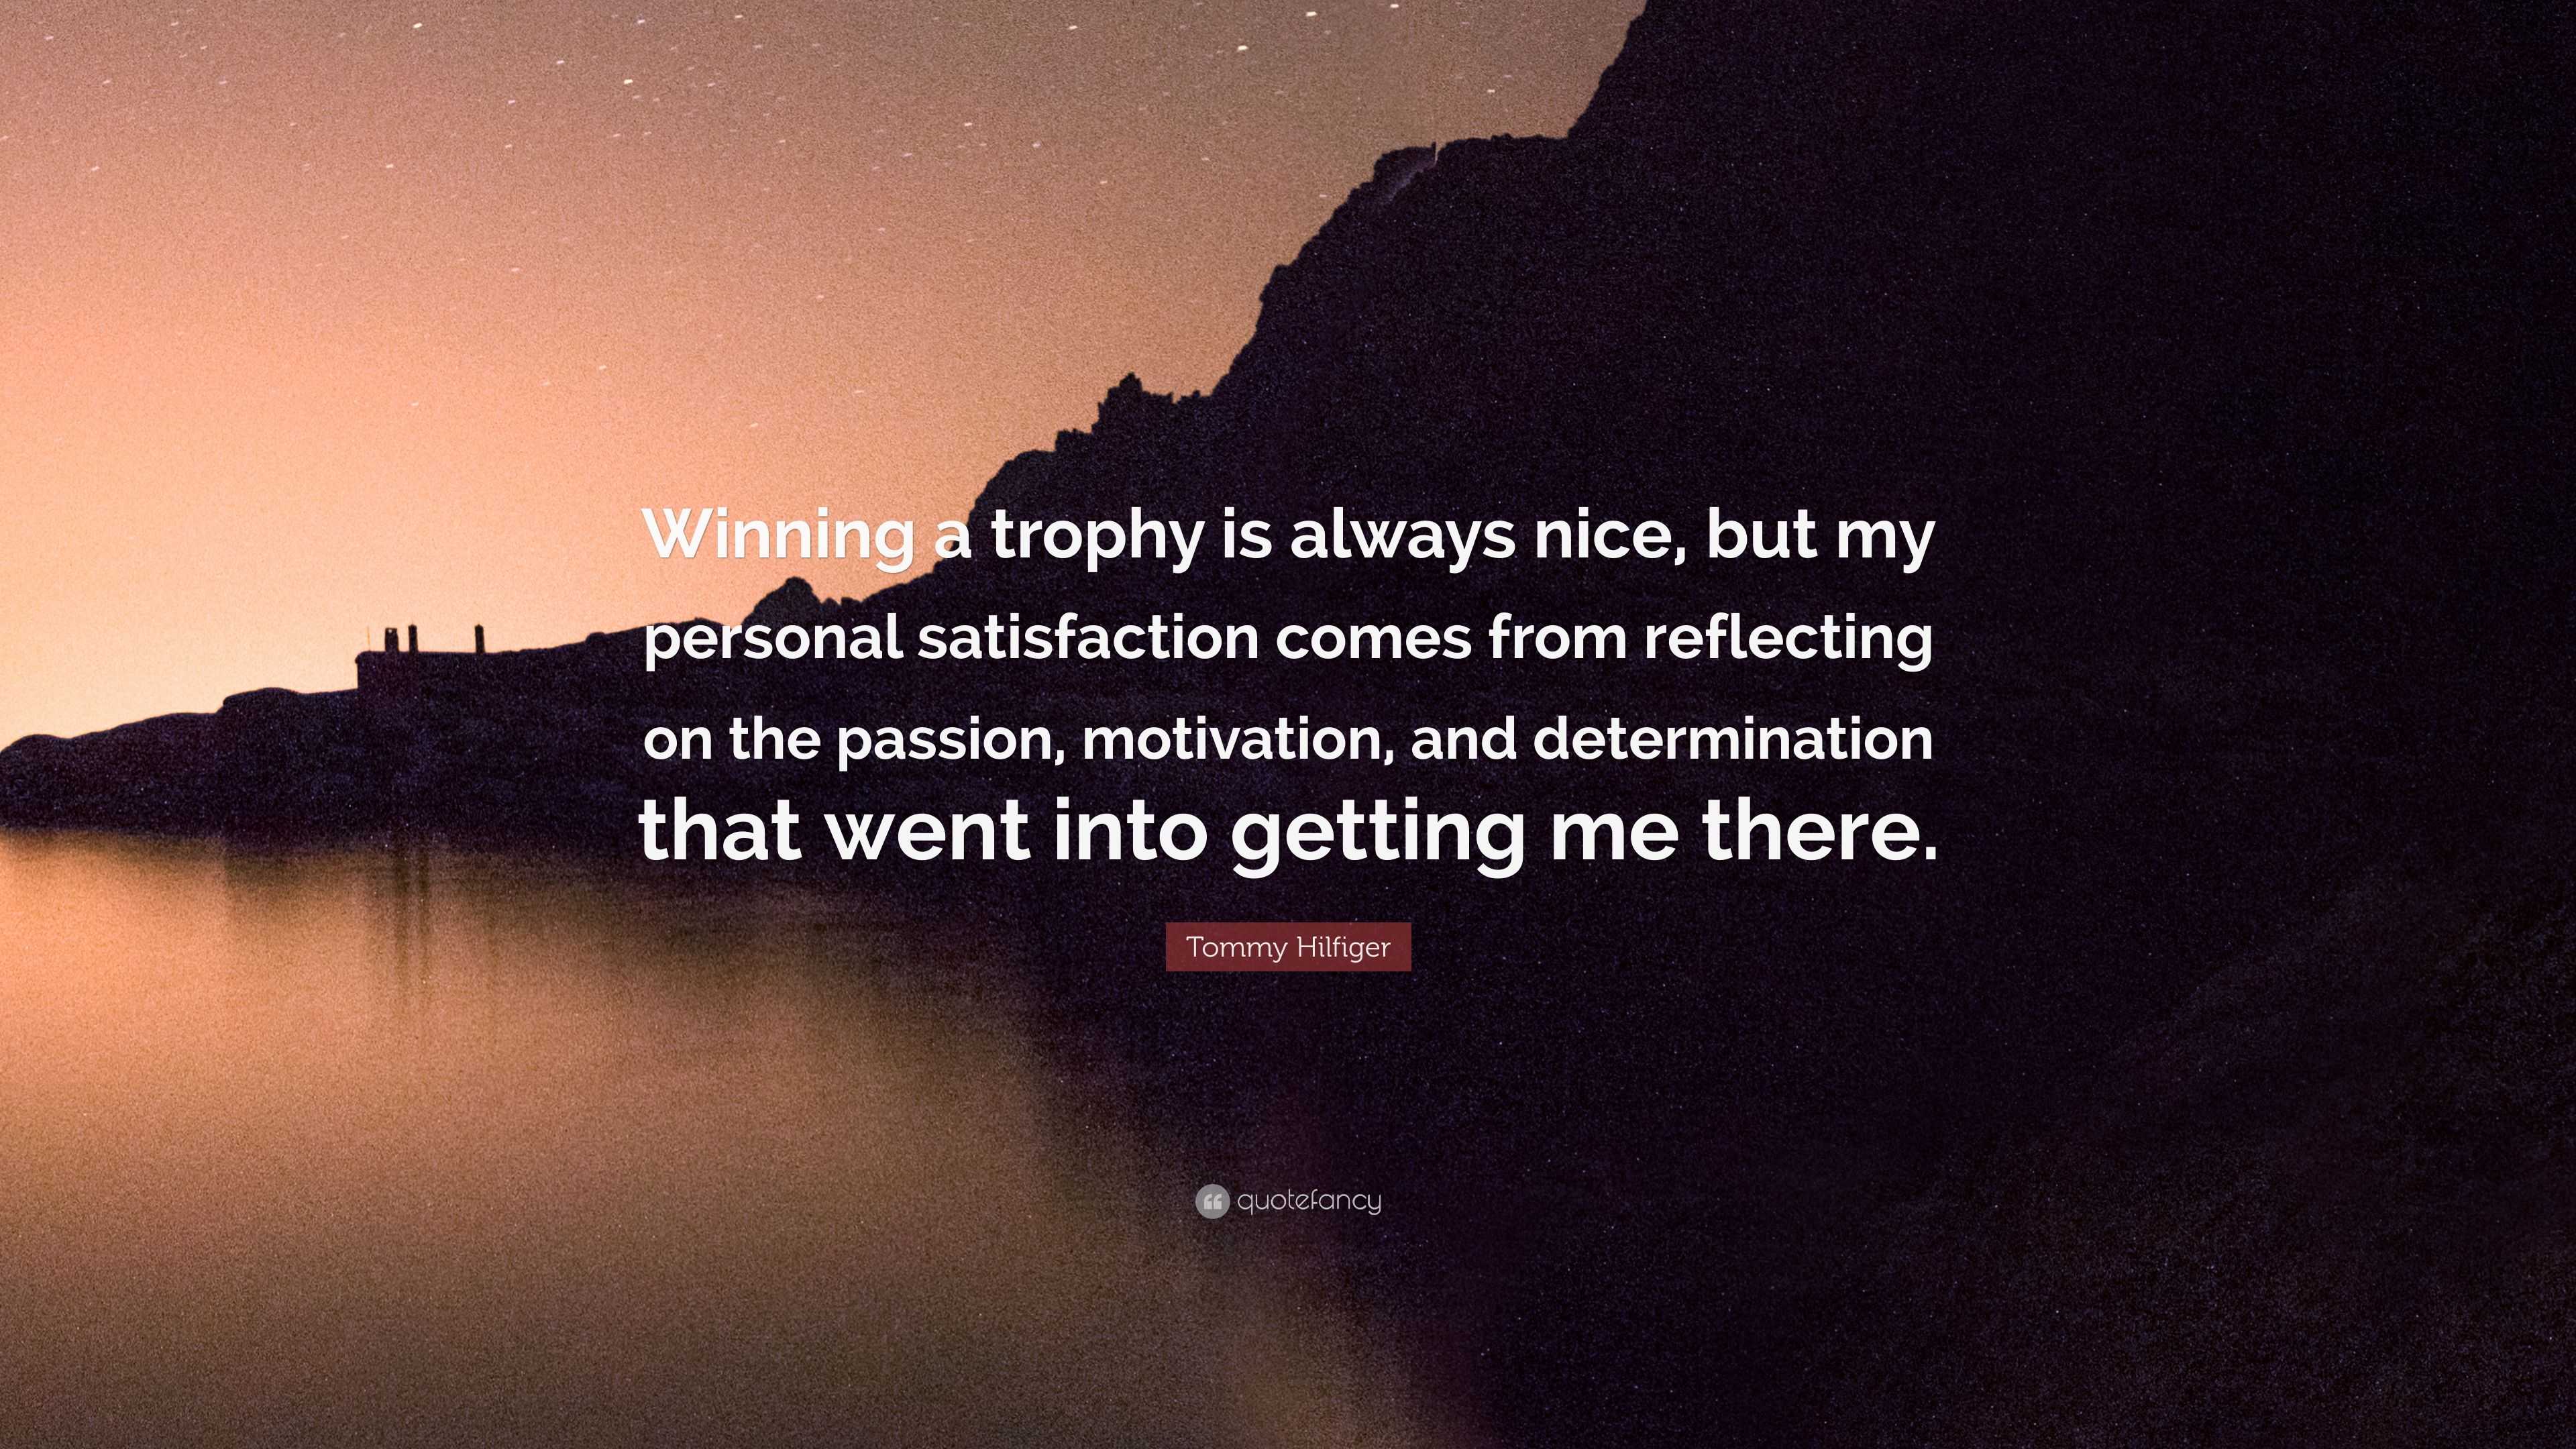 Tommy Hilfiger Quote: “Winning a trophy is always nice, but my